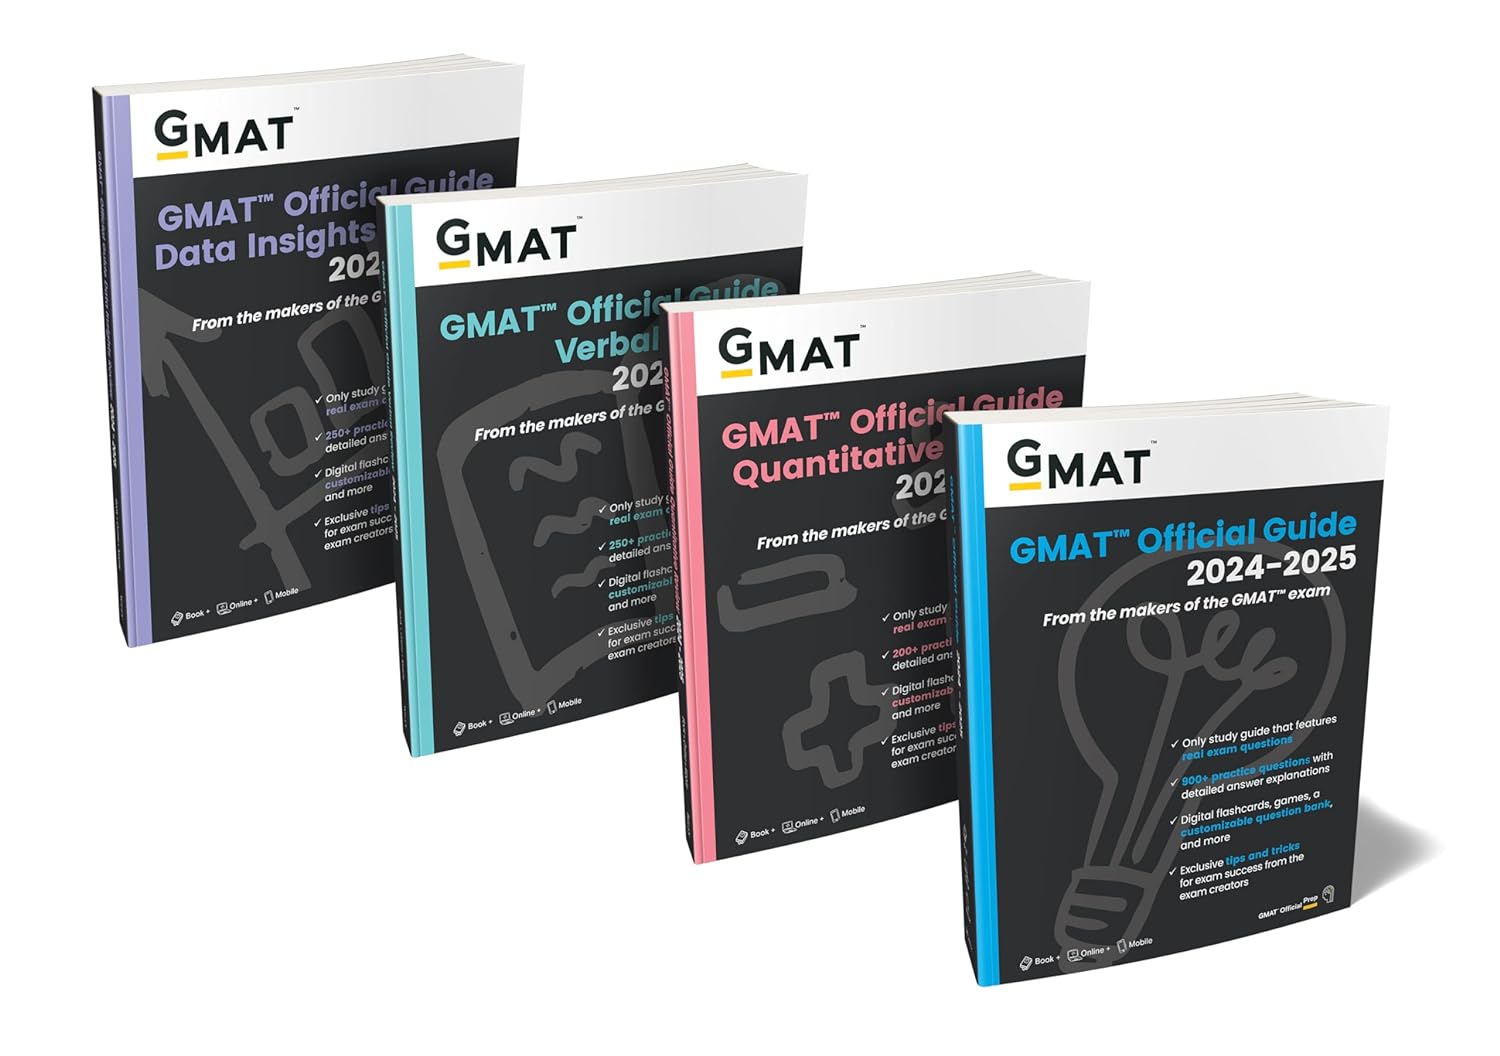 The GMAT Official Guide 4 book set